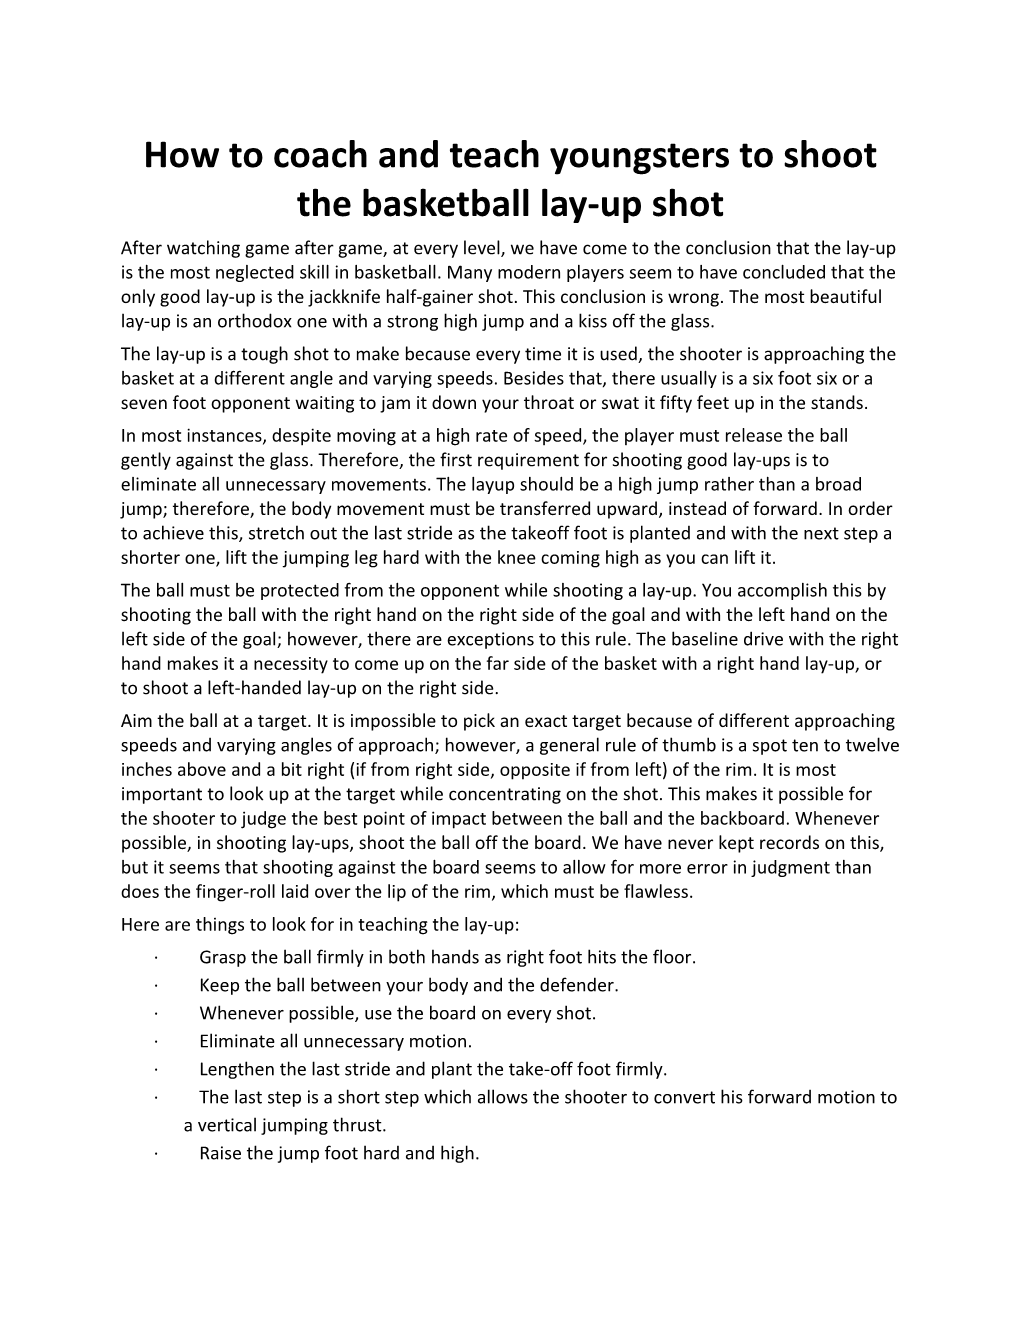 How to Coach and Teach Youngsters to Shoot the Basketball Lay-Up Shot